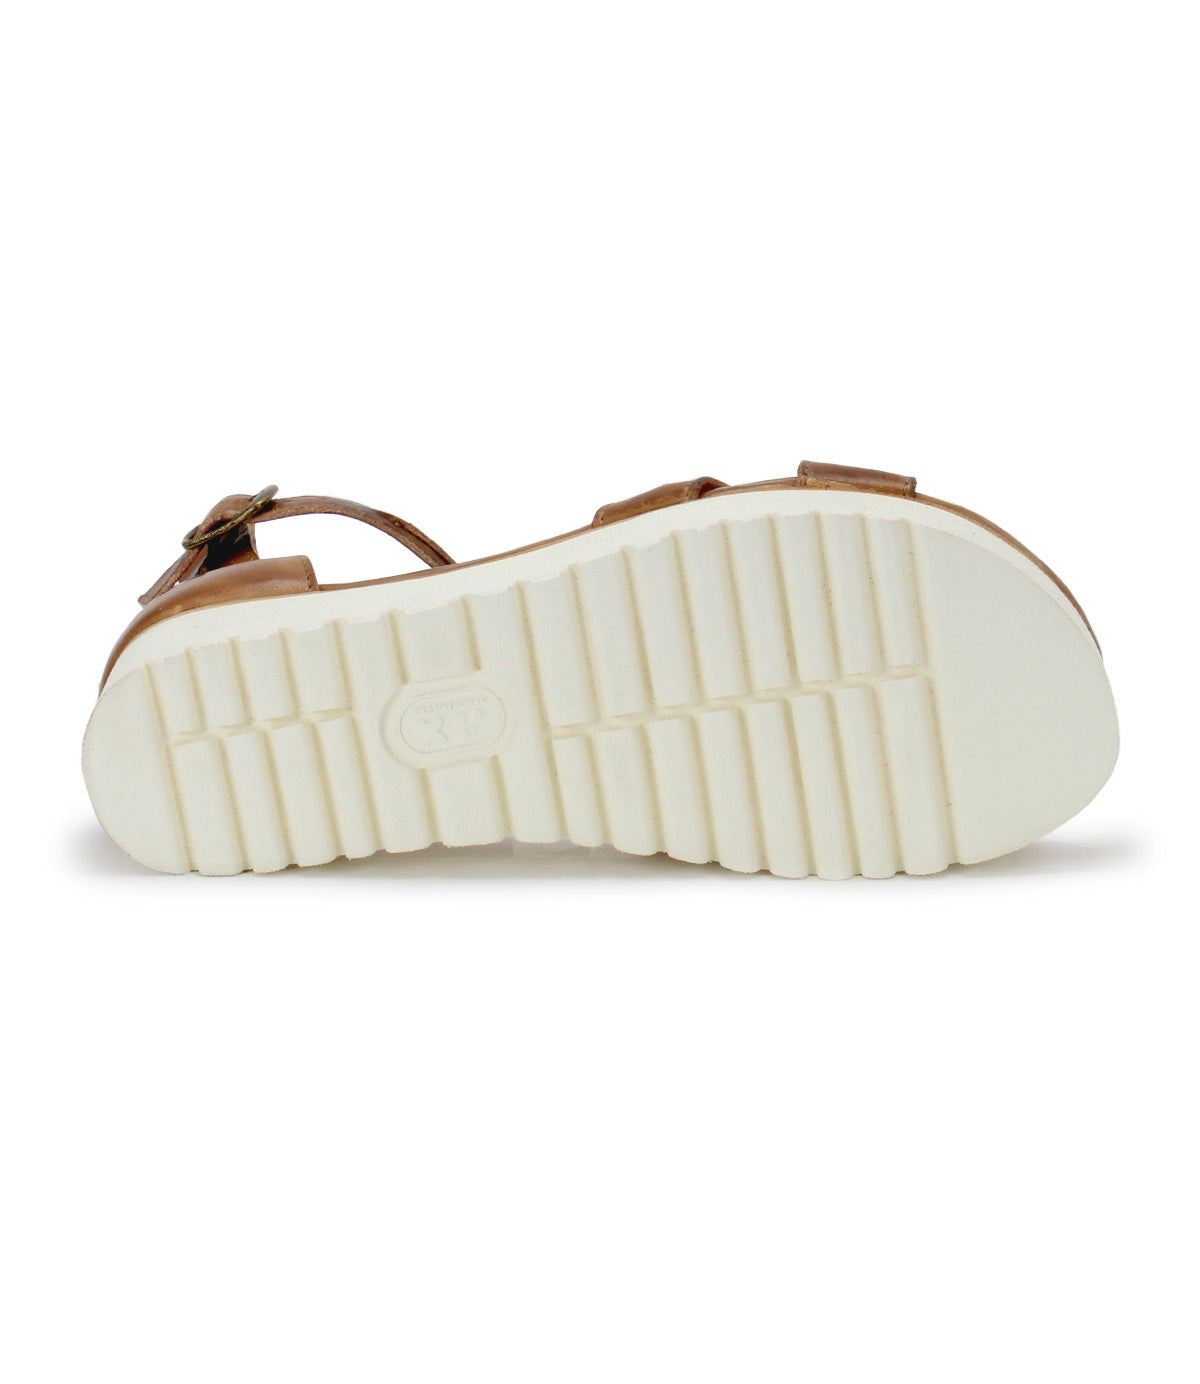 A pair of Bed Stu Carroll women's sandals in tan with white soles.